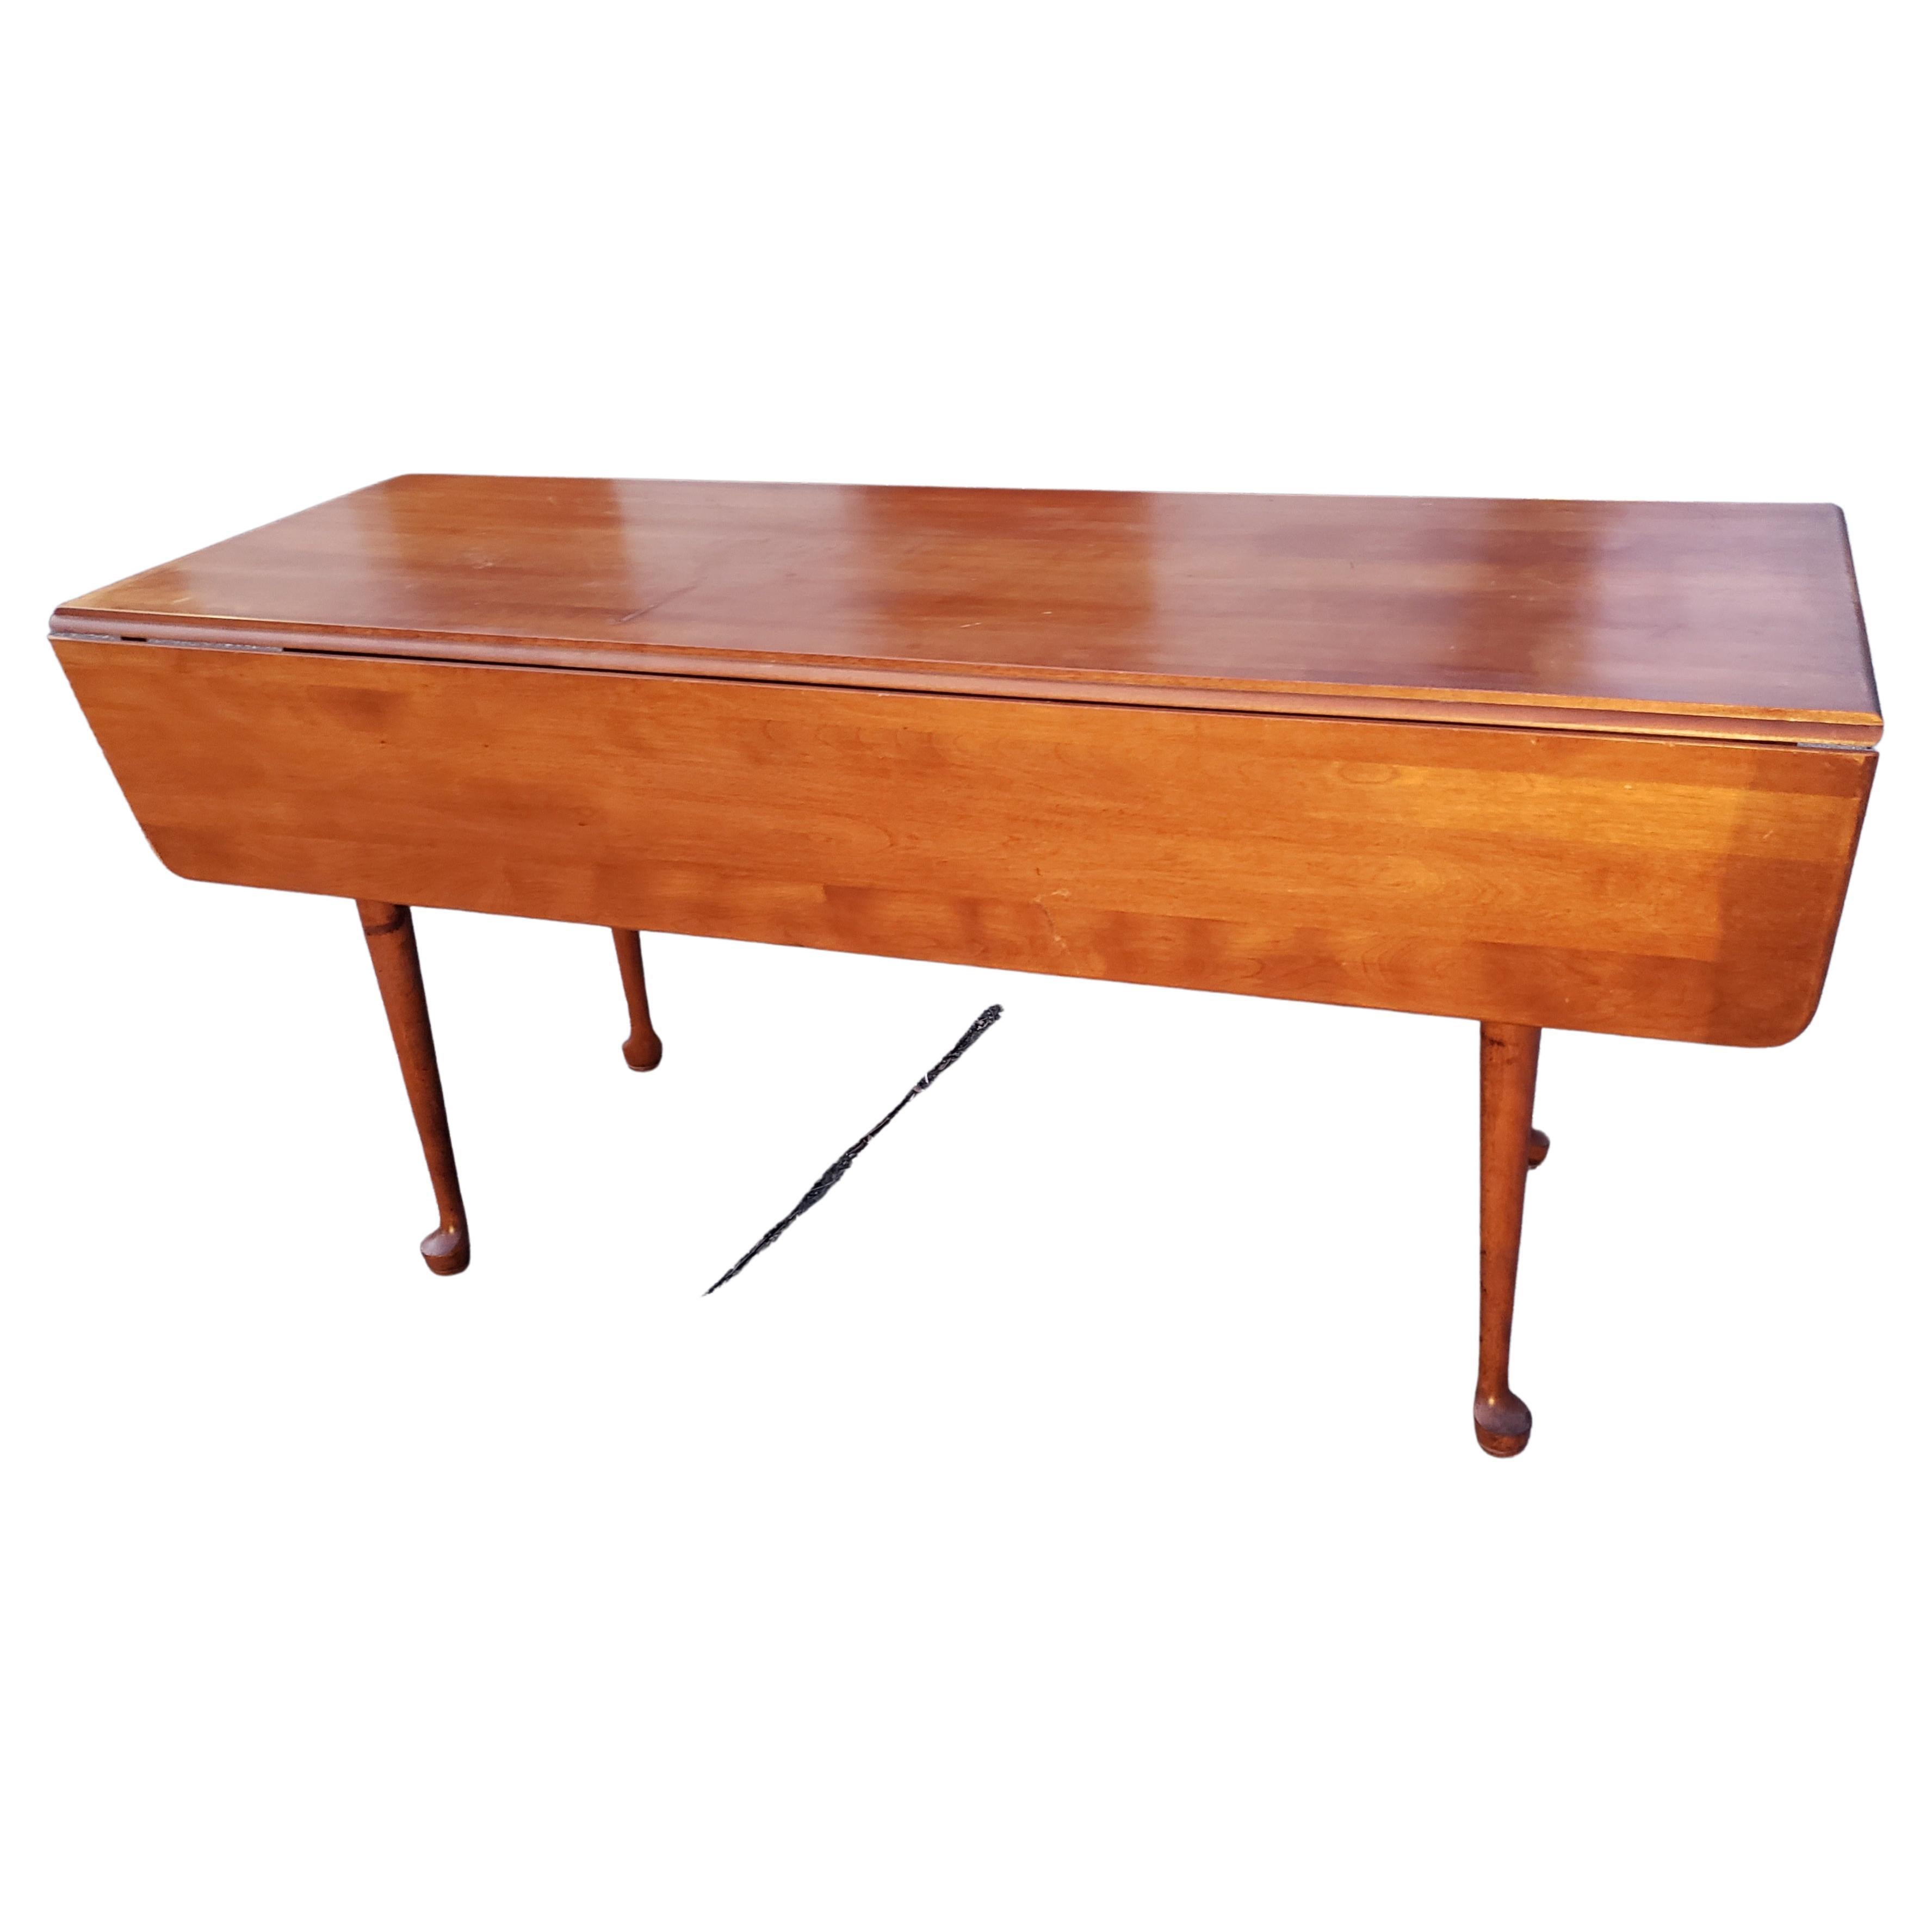 American Cottage drop leaf dining table in solid maple from the 1960s.
This style of table is known as cottage diner table because it is space saving with the leaves down and opens to a large dining table when needed

The table has a solid well